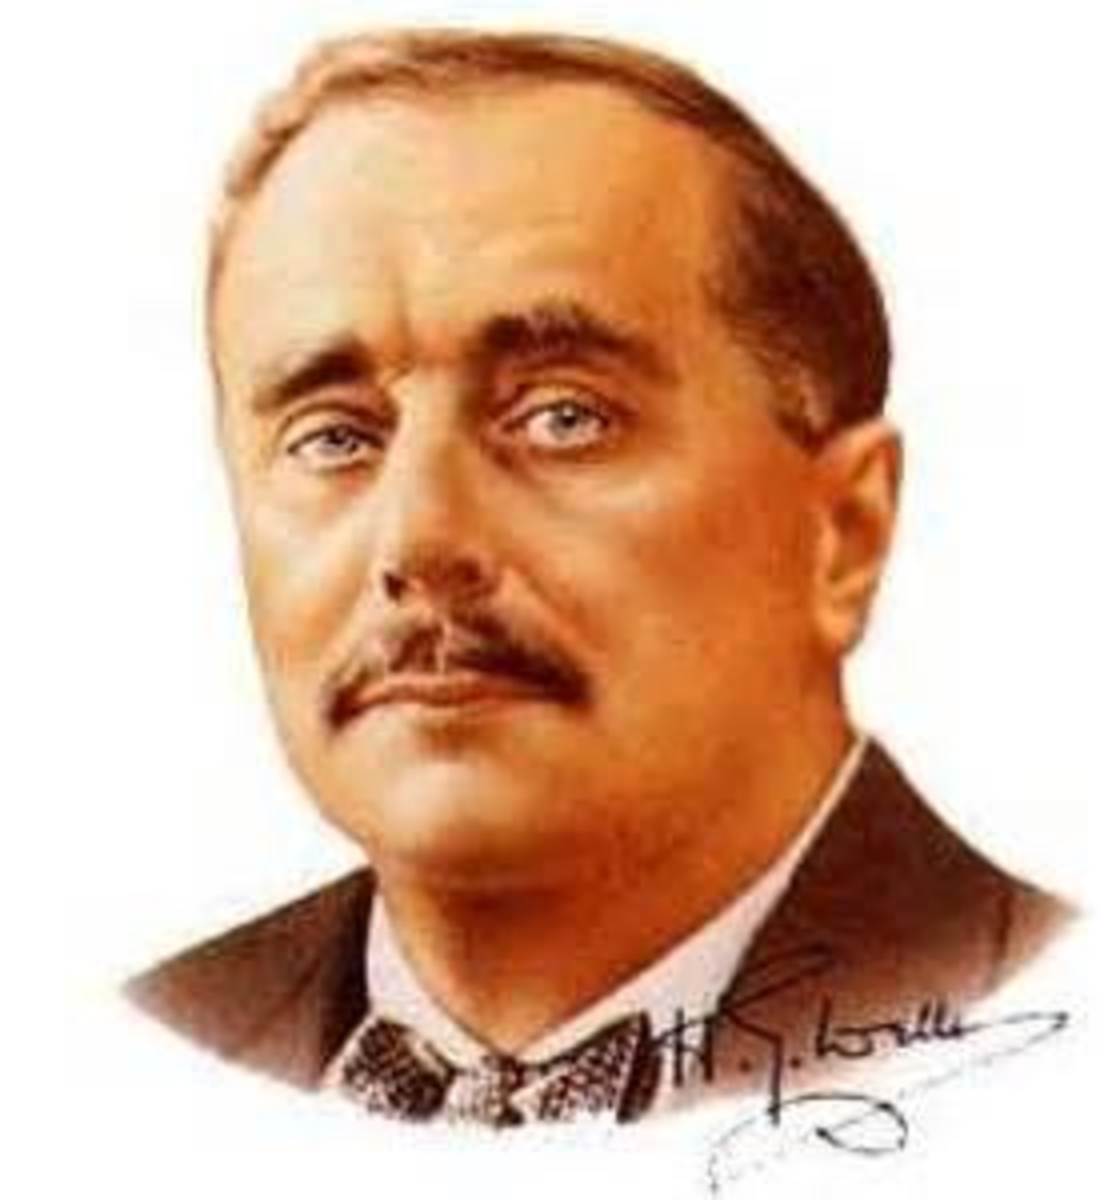 H.G. Wells, author of The Time Machine